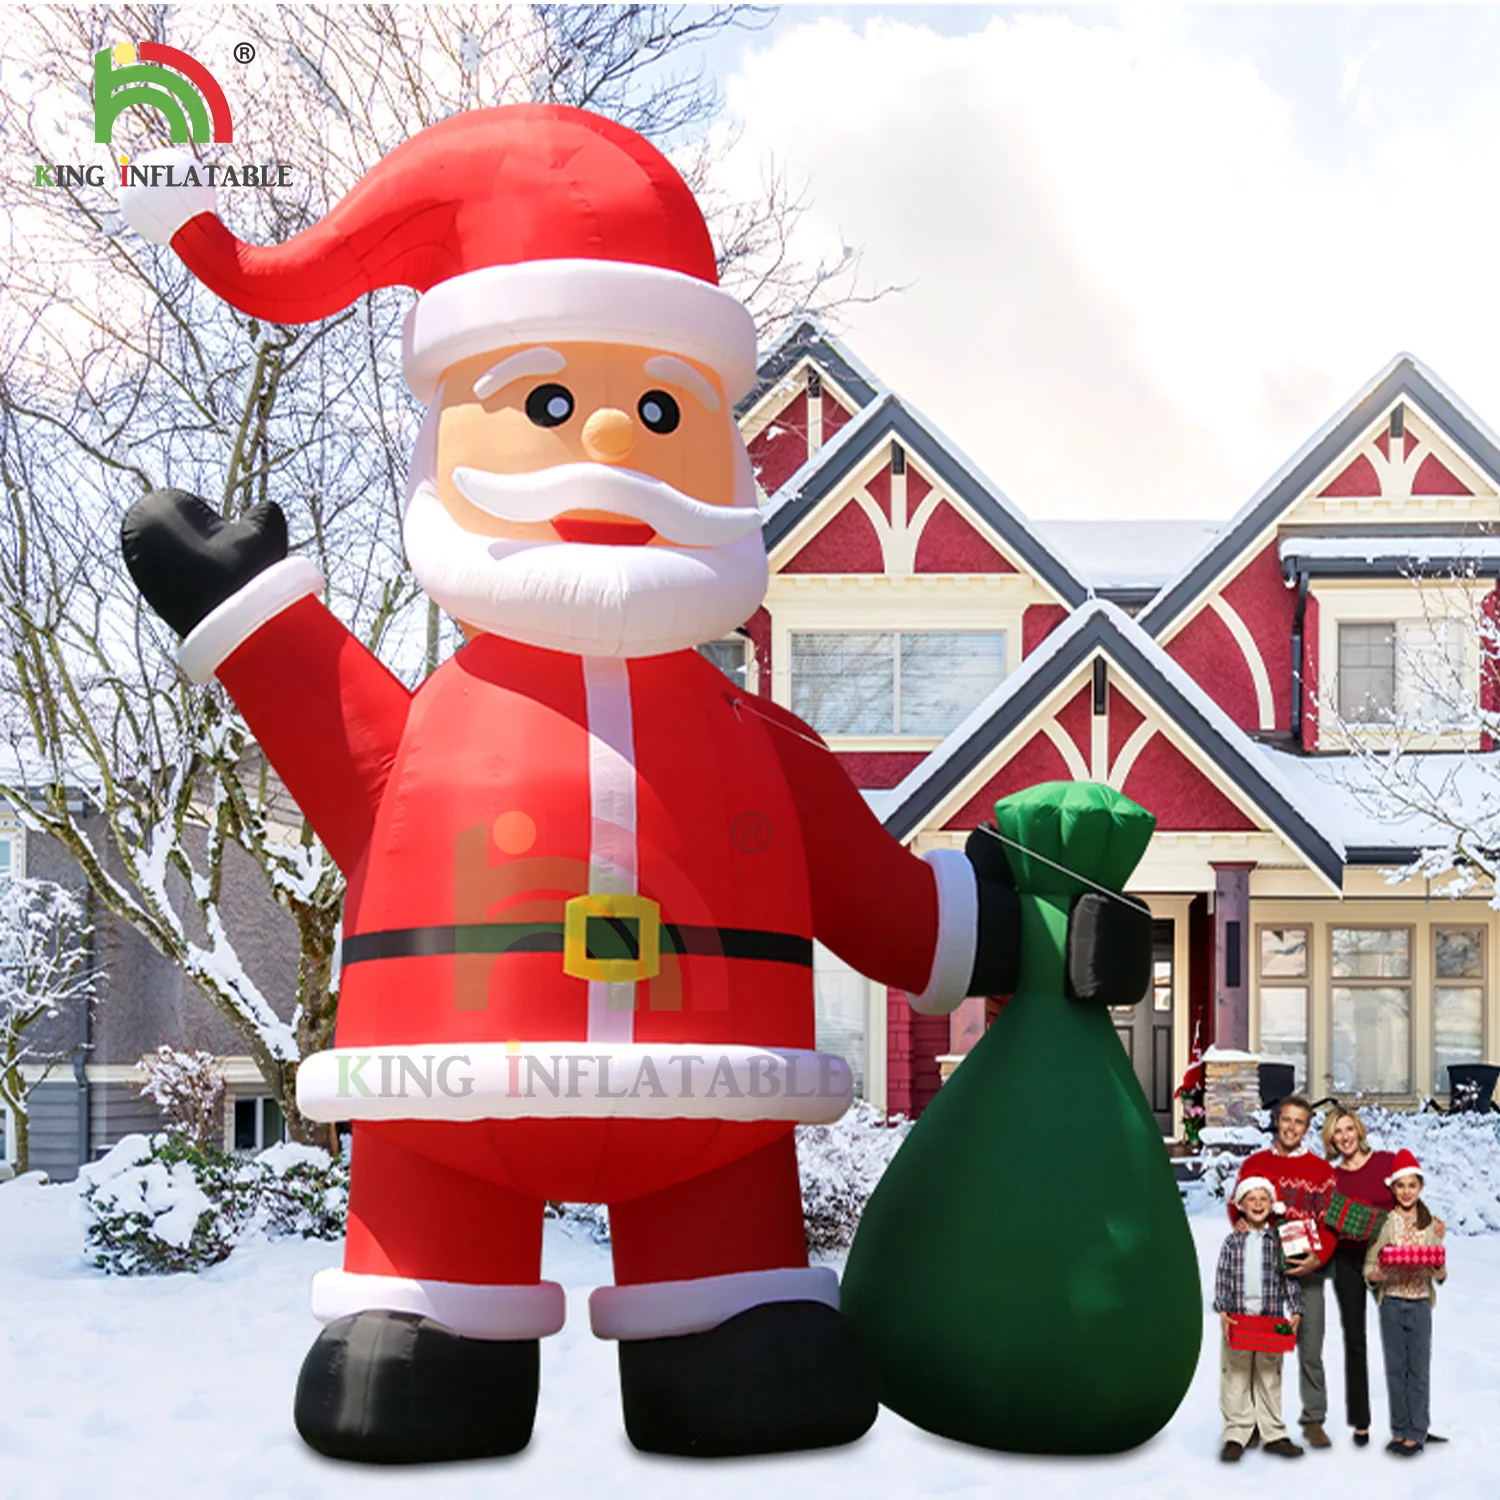 20/26/33ft Giant Inflatable Santa Claus Outdoors Christmas Father Decorations Festival Party Xmas Celebration With Blower Oxford